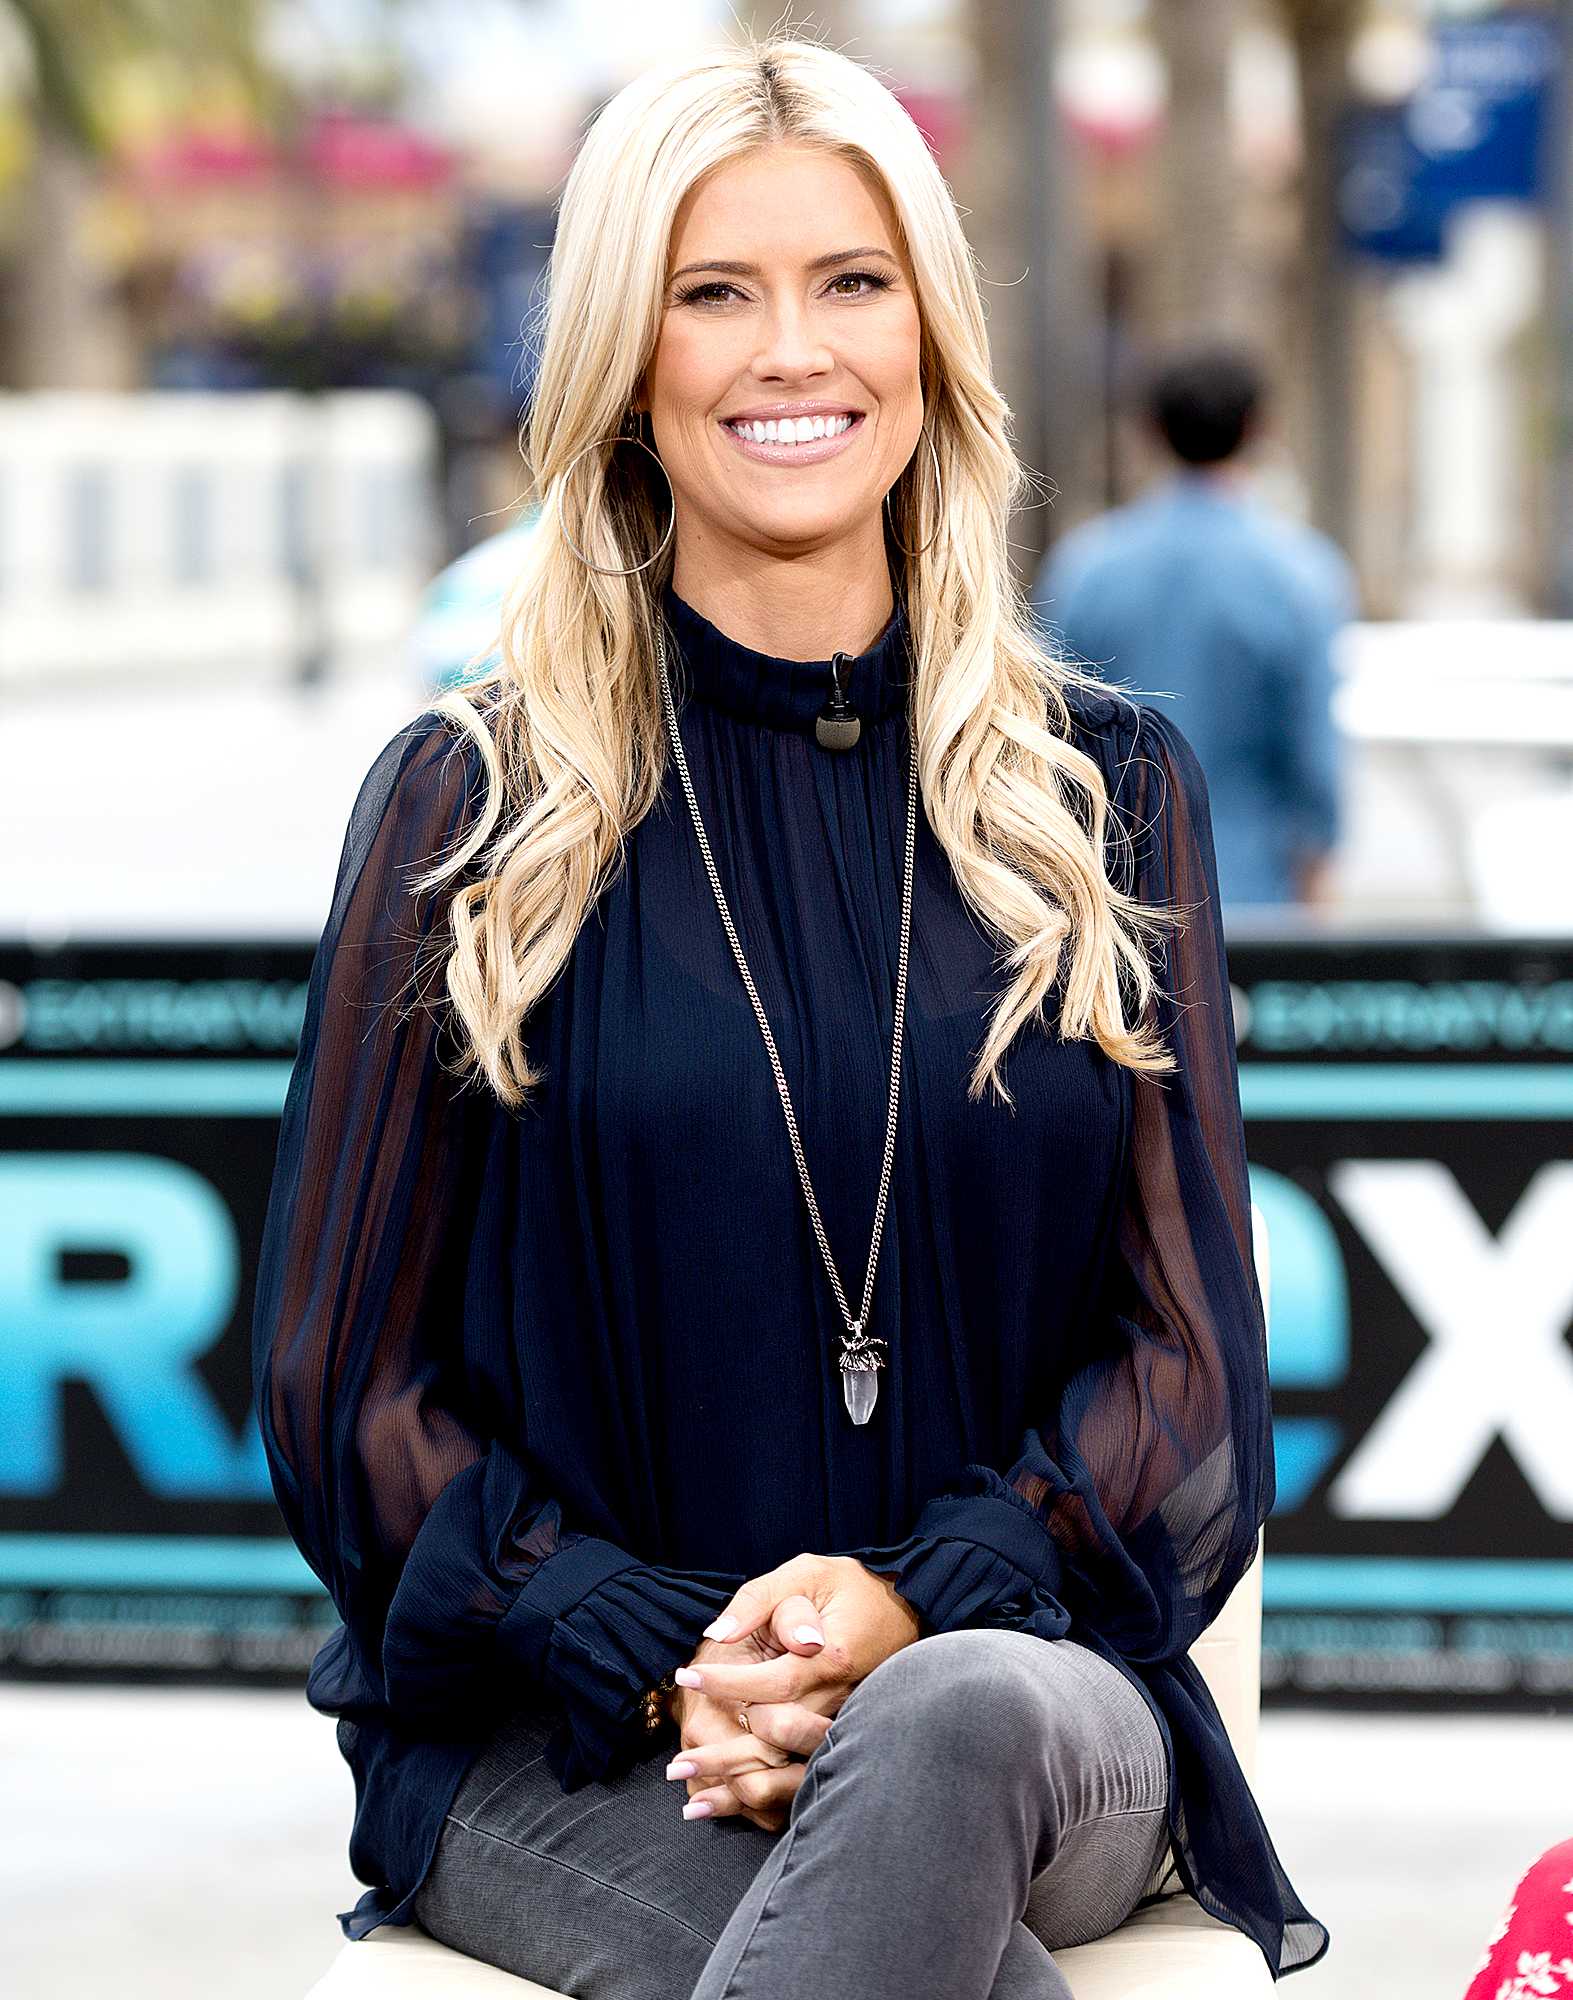 70+ Hot Pictures Of Christina Anstead Which Are Just Too Hot To Handle 12